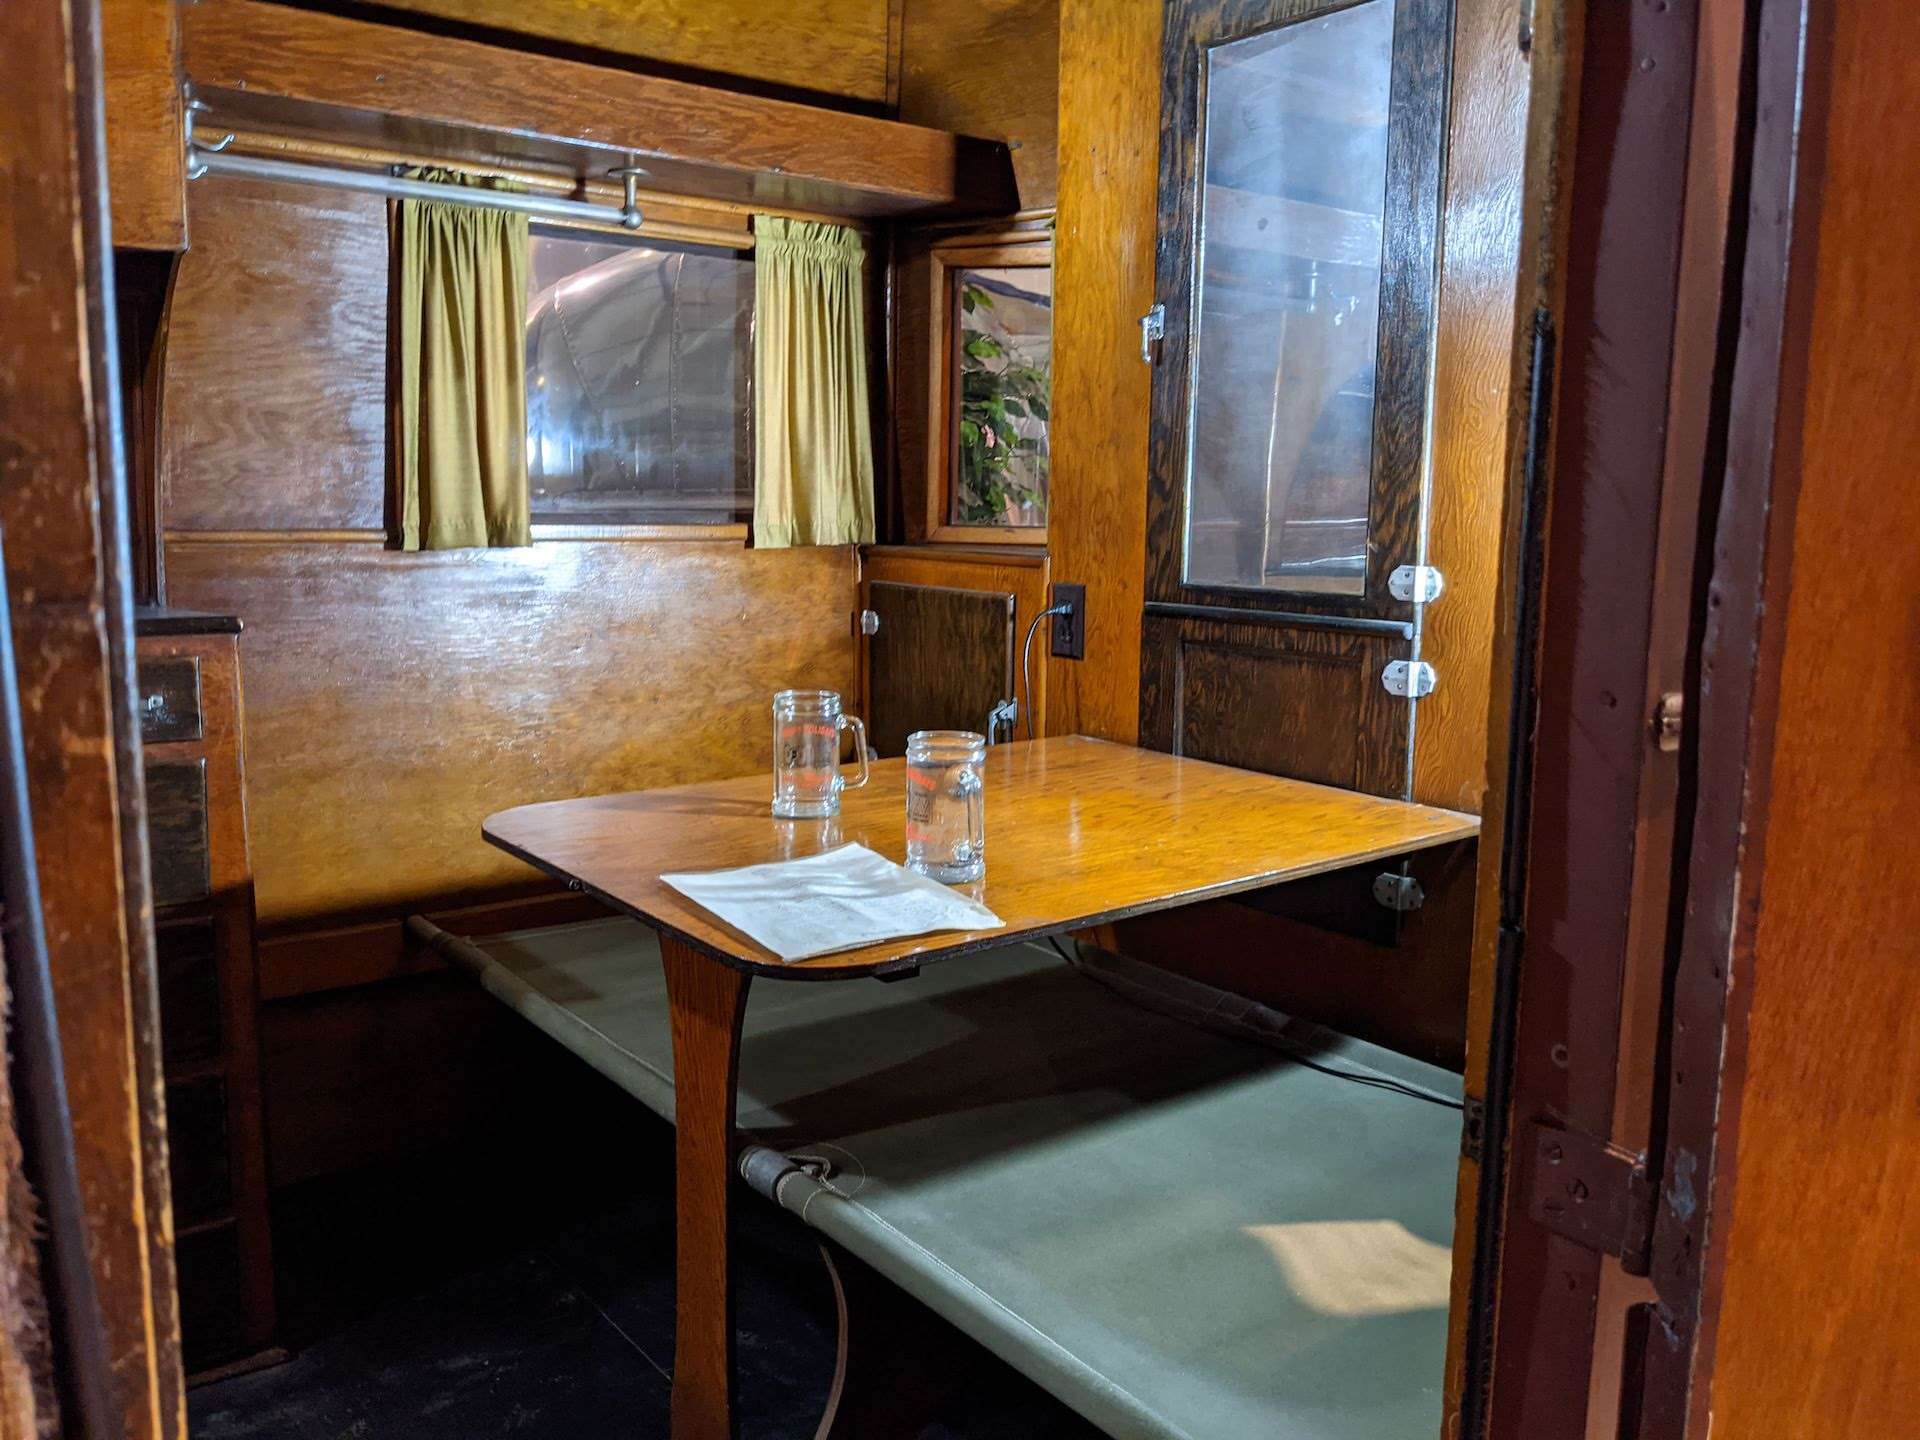 Dining table inside of covered wagon.